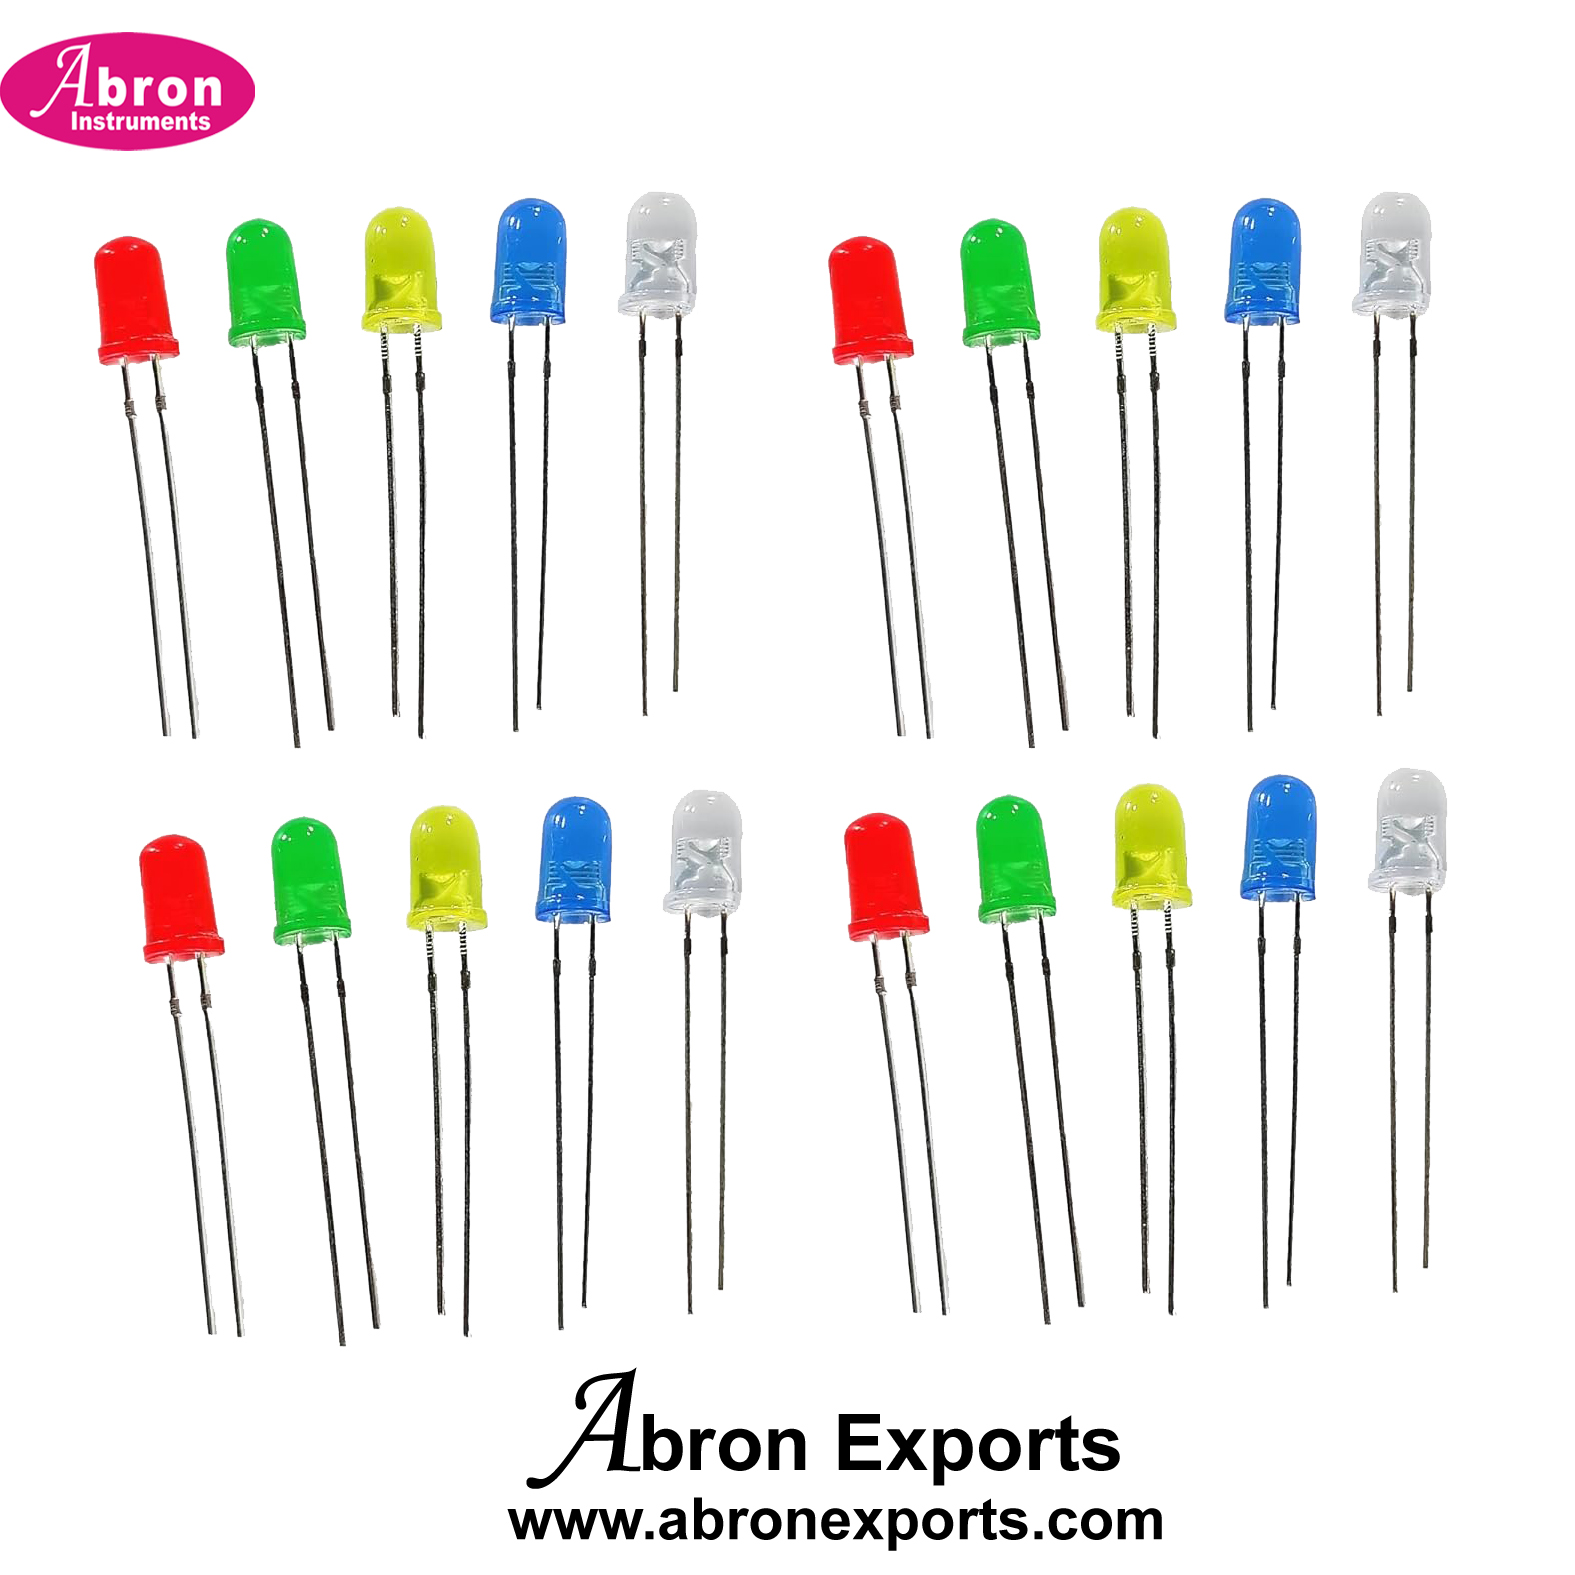  LED 5mm Colorful Pack of 100 5mm LED Light Bulbs with White, Green, Red, Yellow, and Blue Colors  20 Pieces Each Abron AE-1224LED5